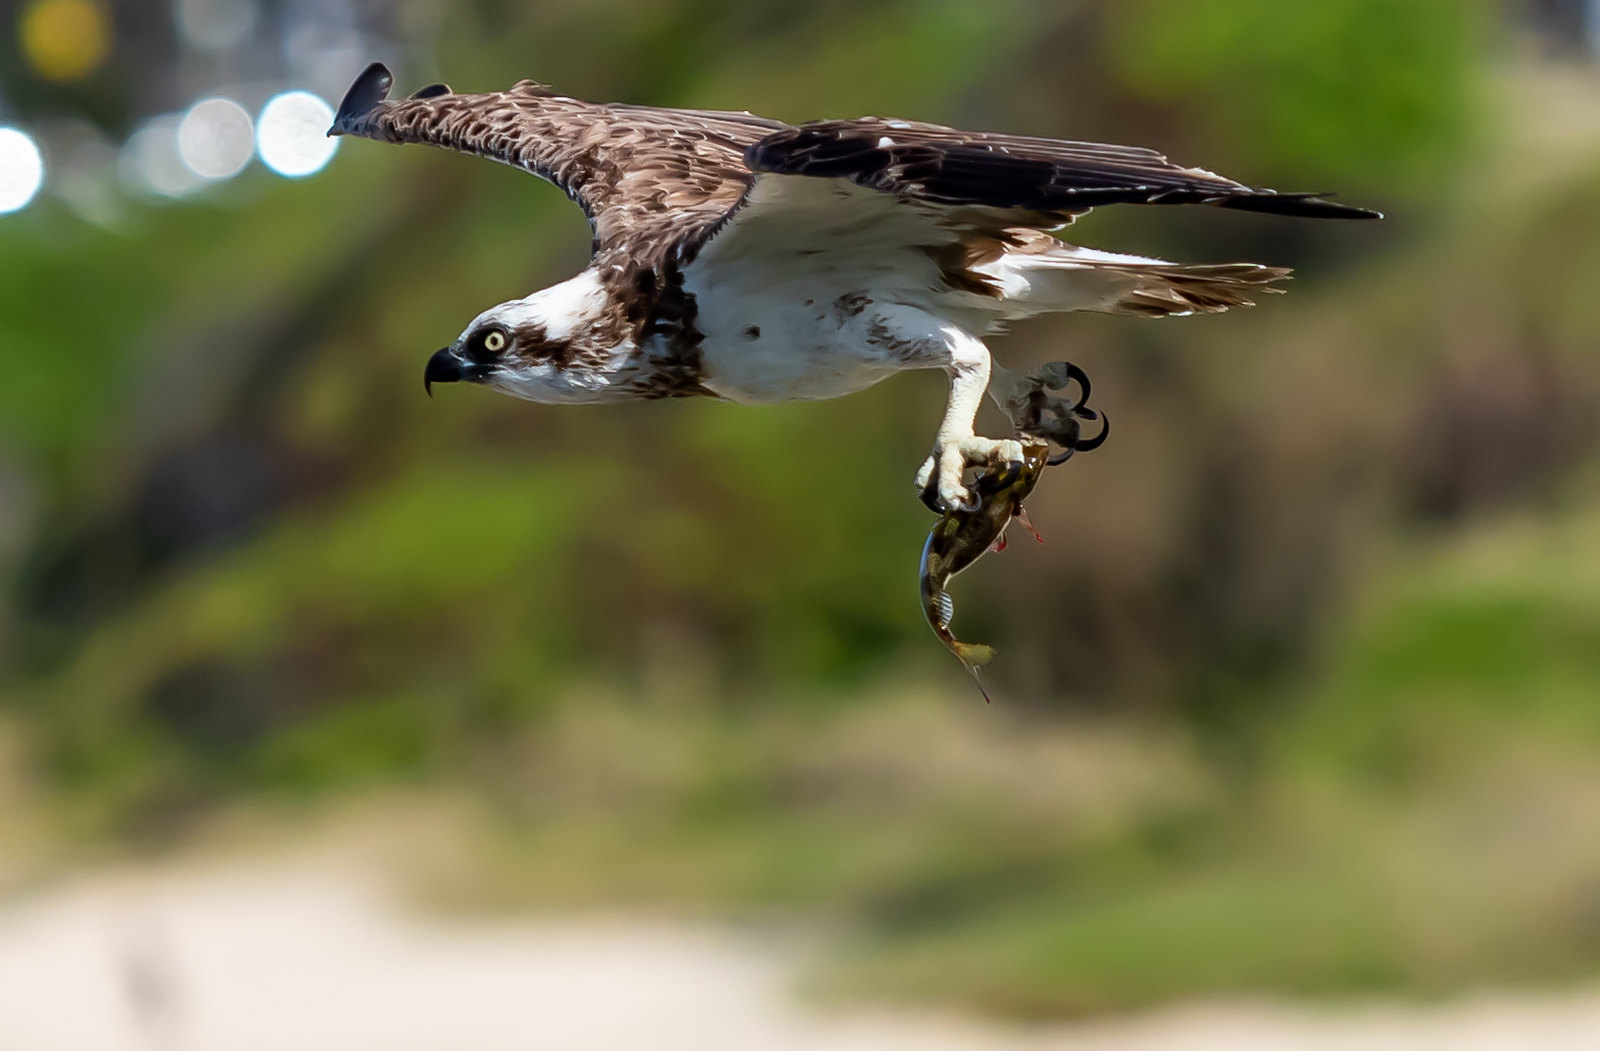 Osprey mid flight holding a fish in its claws.